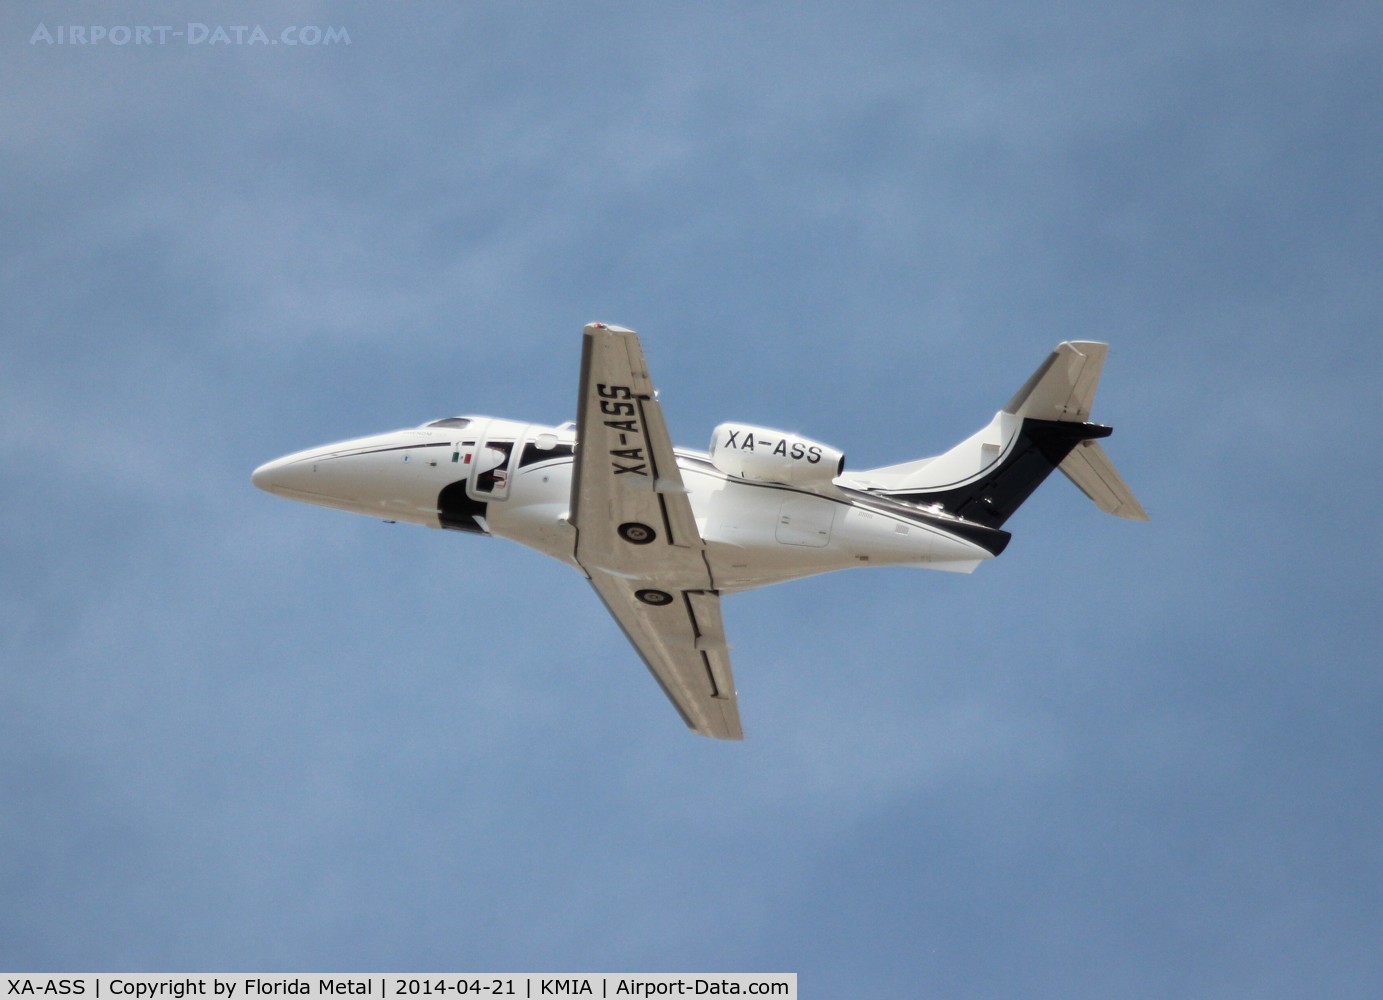 XA-ASS, 2013 Embraer EMB-505 Phenom 100 C/N 50000271, you can't tell me they didn't accidentally come up with this reg